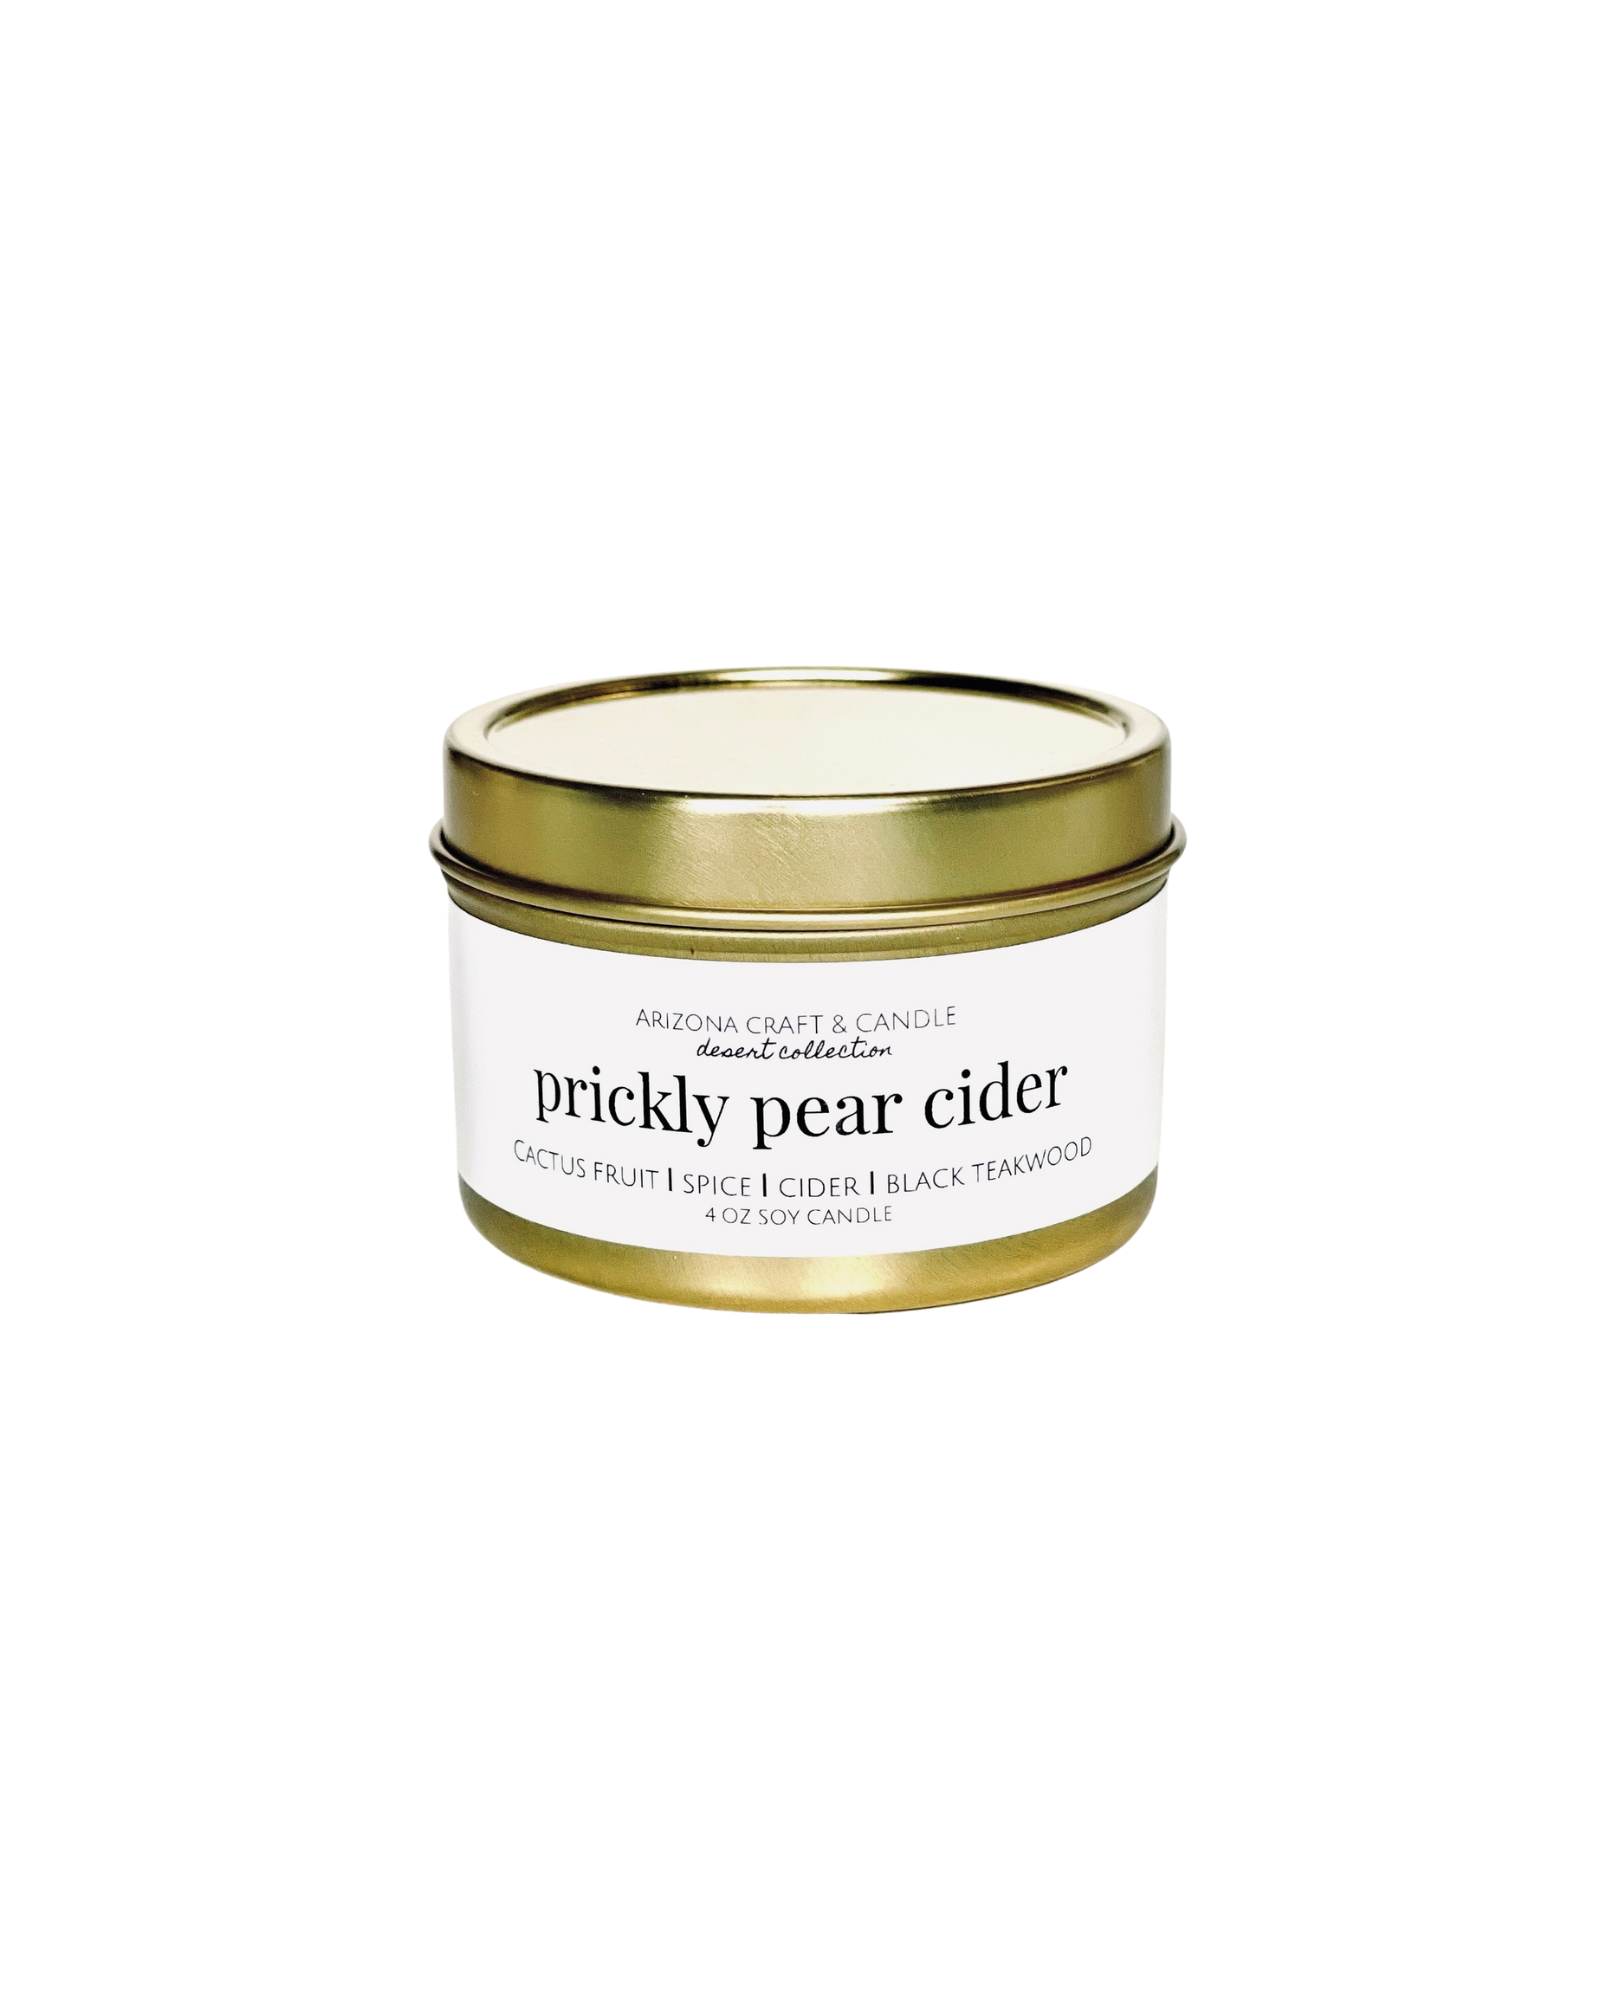 Prickly Pear Cider Travel Candle